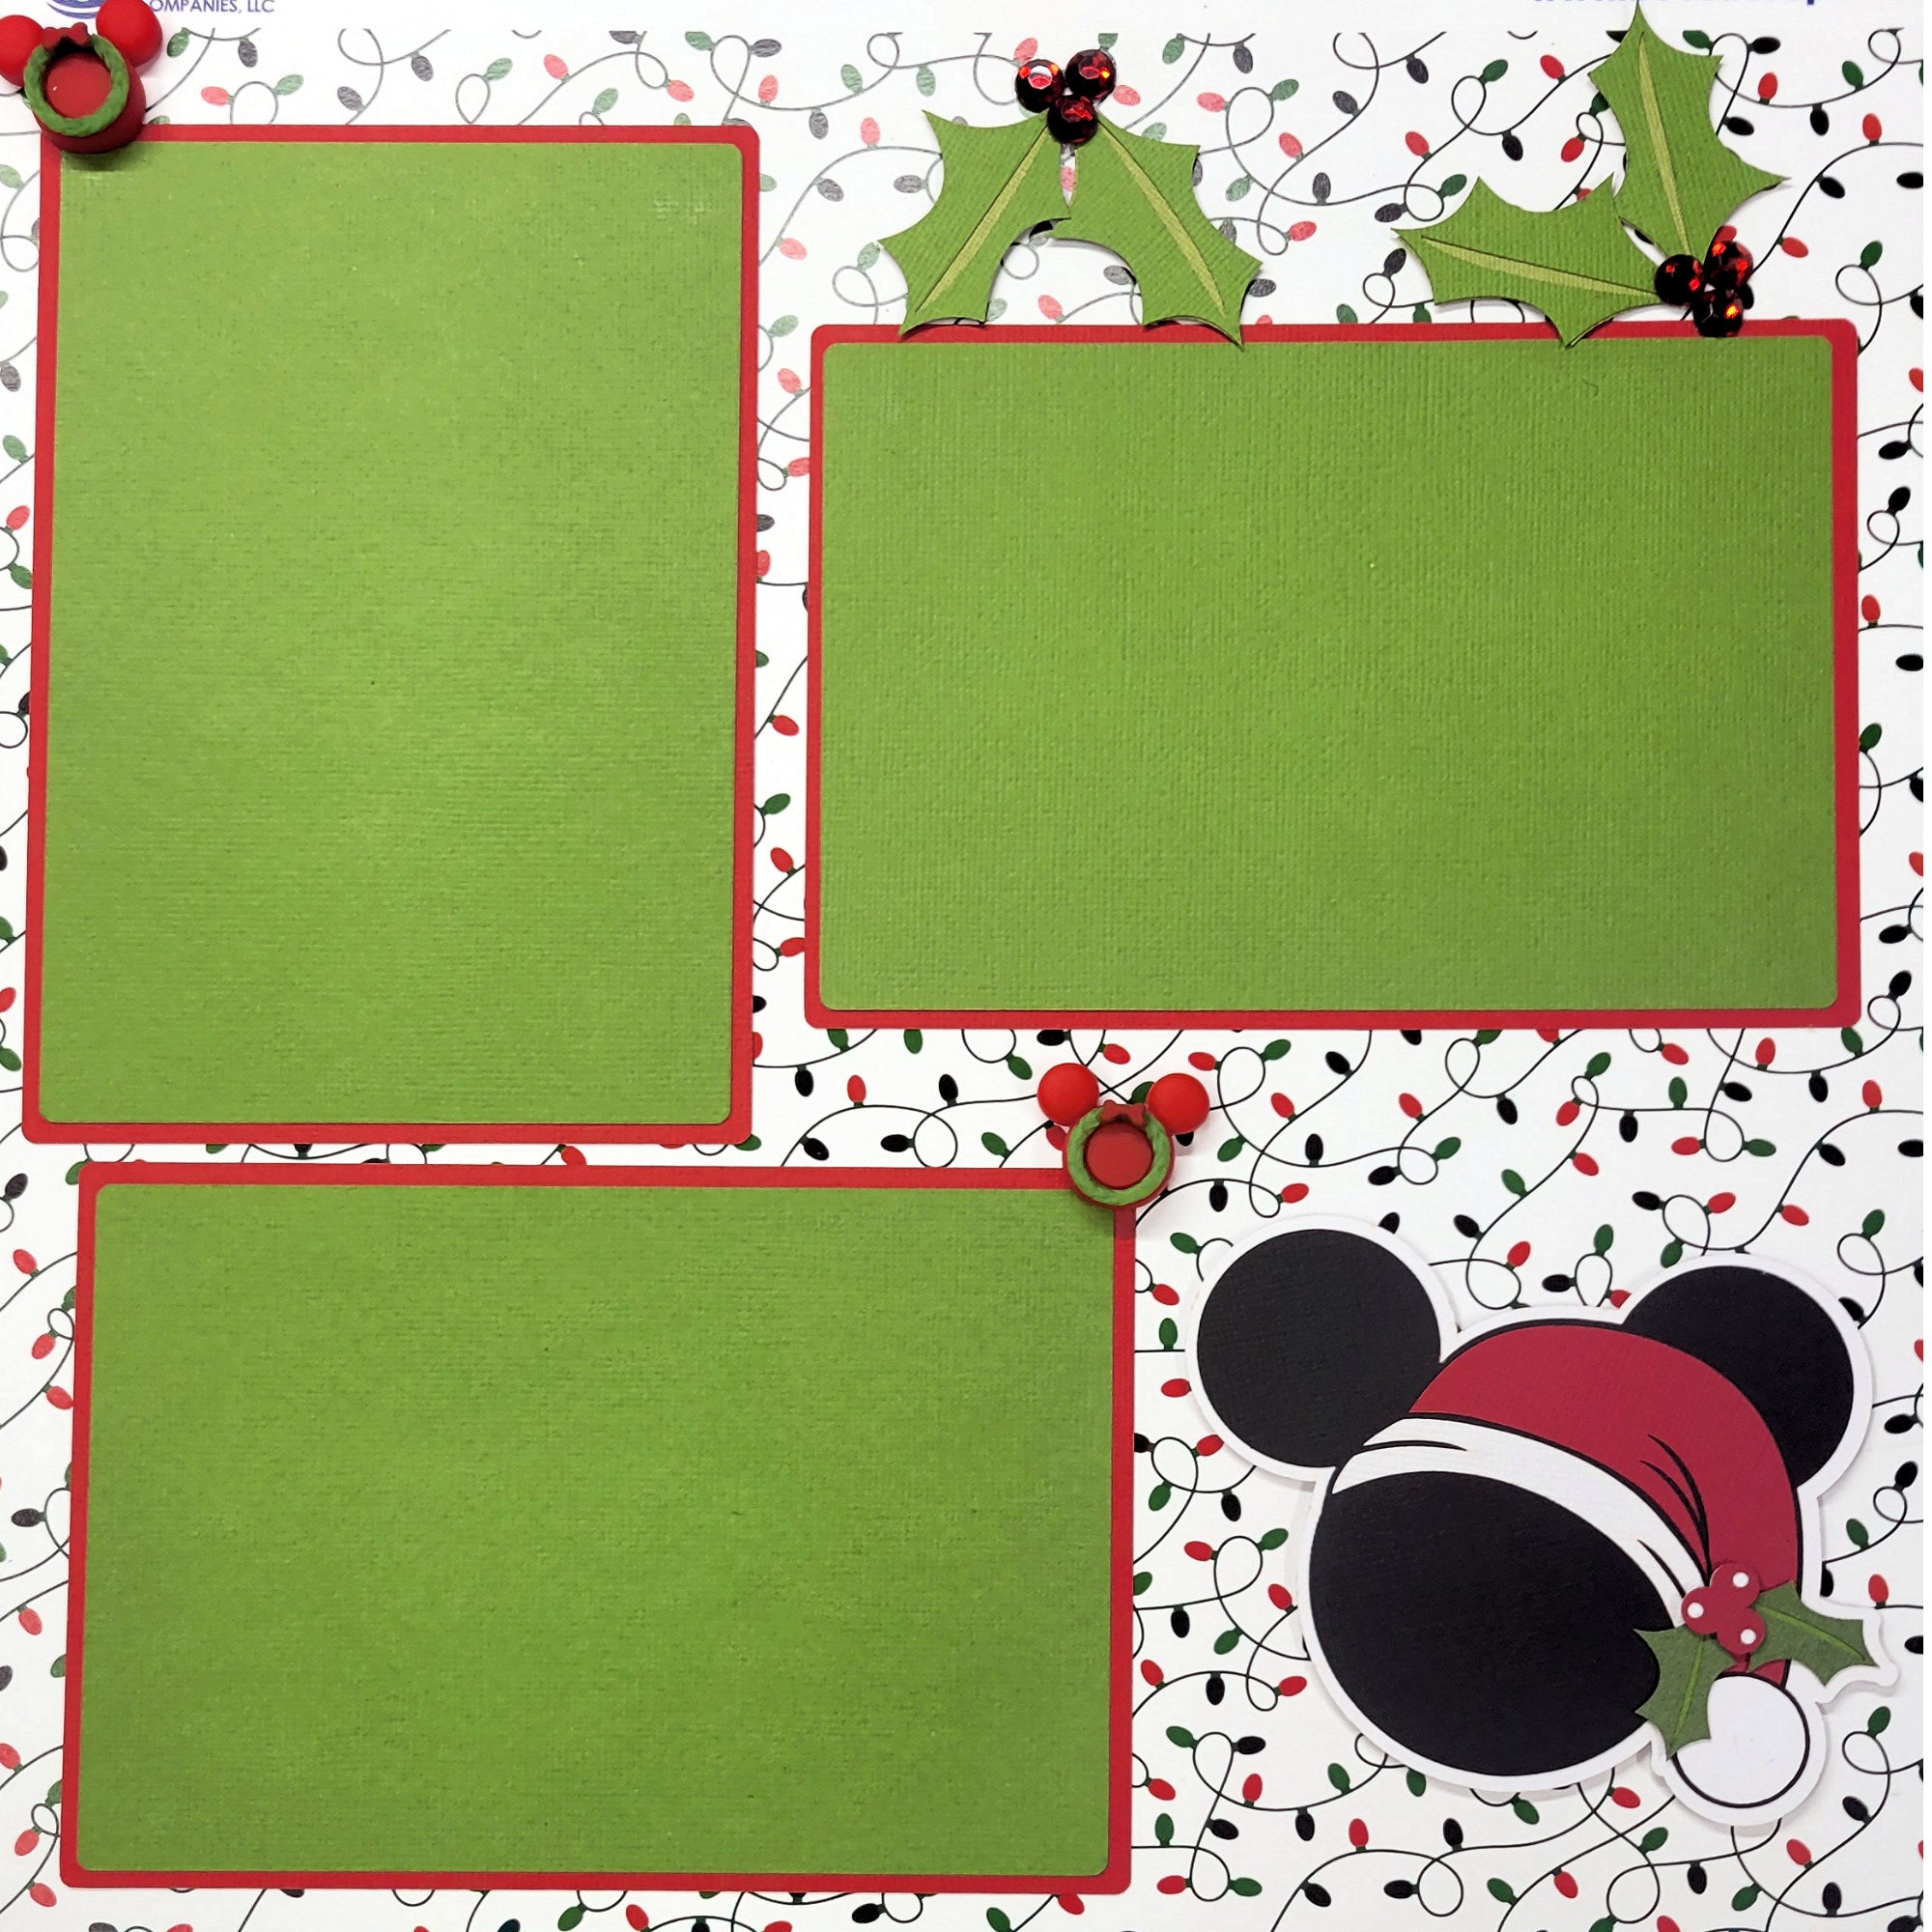 A Magical Christmas (2) - 12 x 12 Pages, Fully-Assembled & Hand-Crafted 3D Scrapbook Premade by SSC Designs